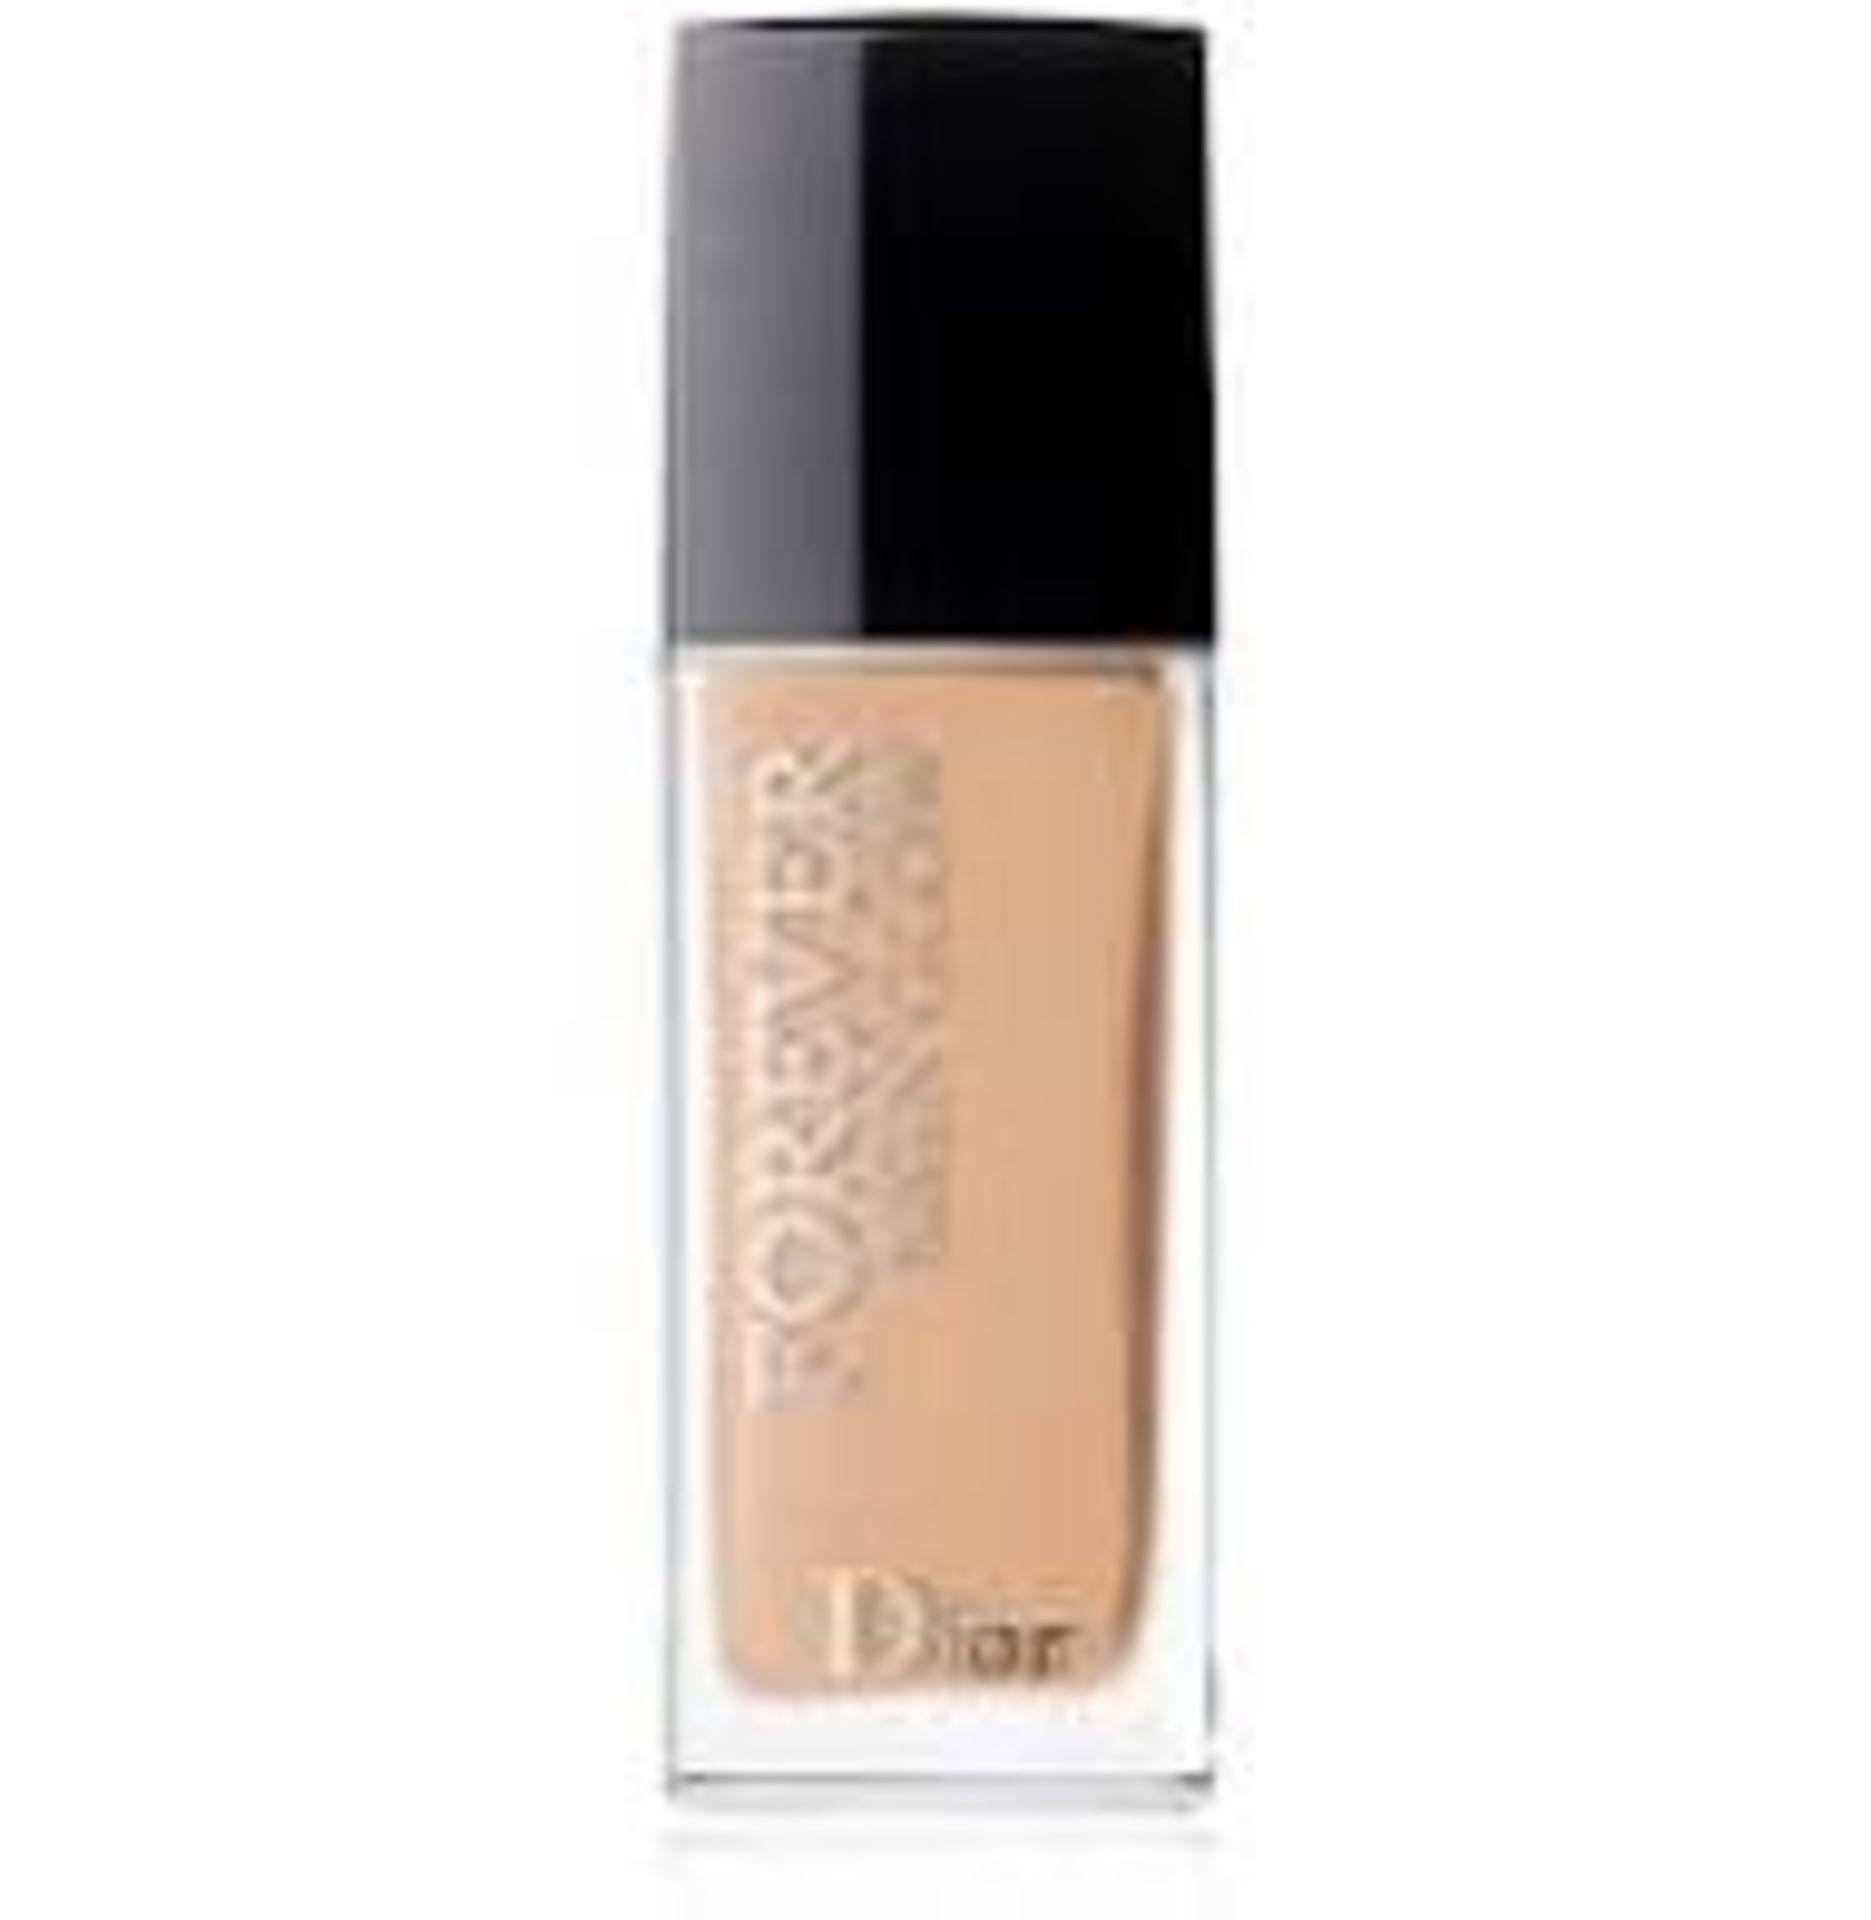 RRP £37 Dior Forever Skin Glow Foundation (Shade 3.5N) (Ex Display) (Appraisals Available Upon